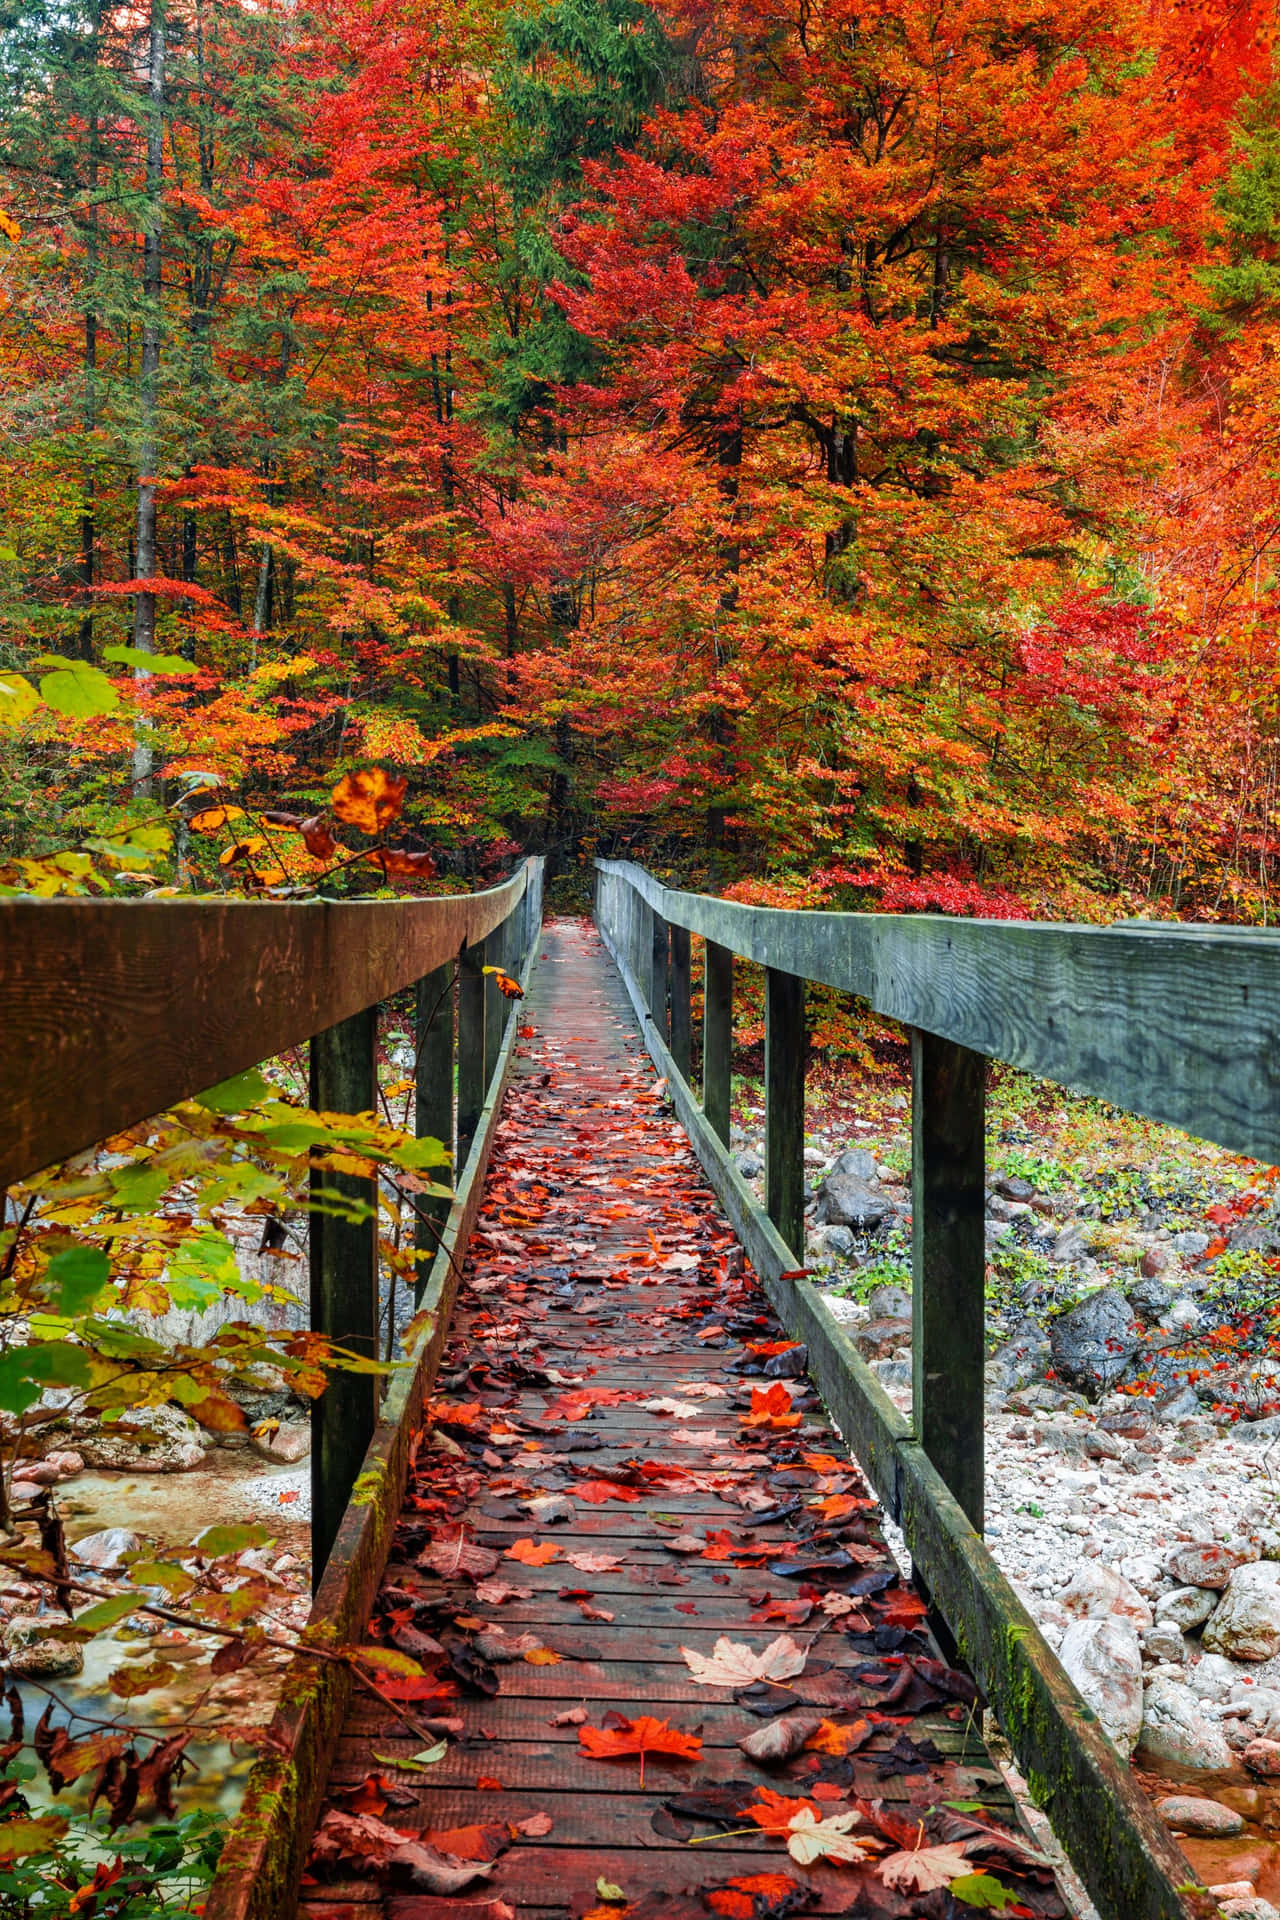 A Wooden Bridge Over A Stream In The Fall